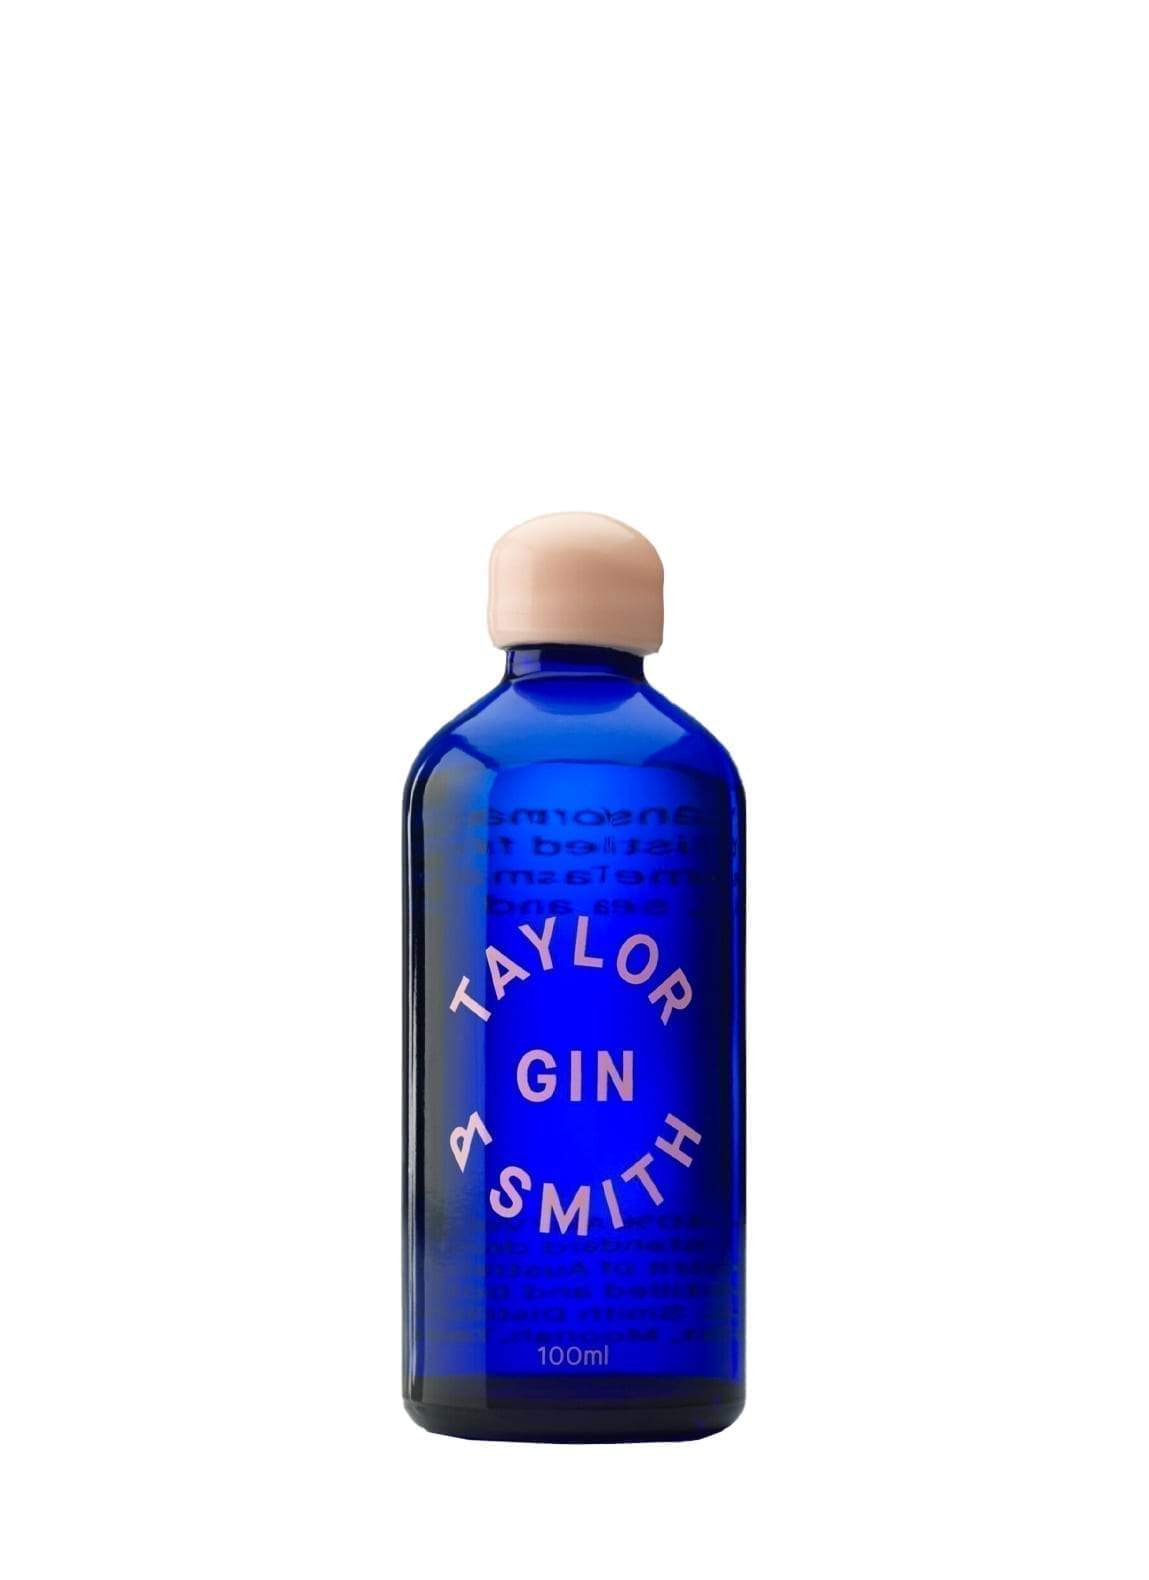 Taylor & Smith Gin 40% 100ml | Gin | Shop online at Spirits of France